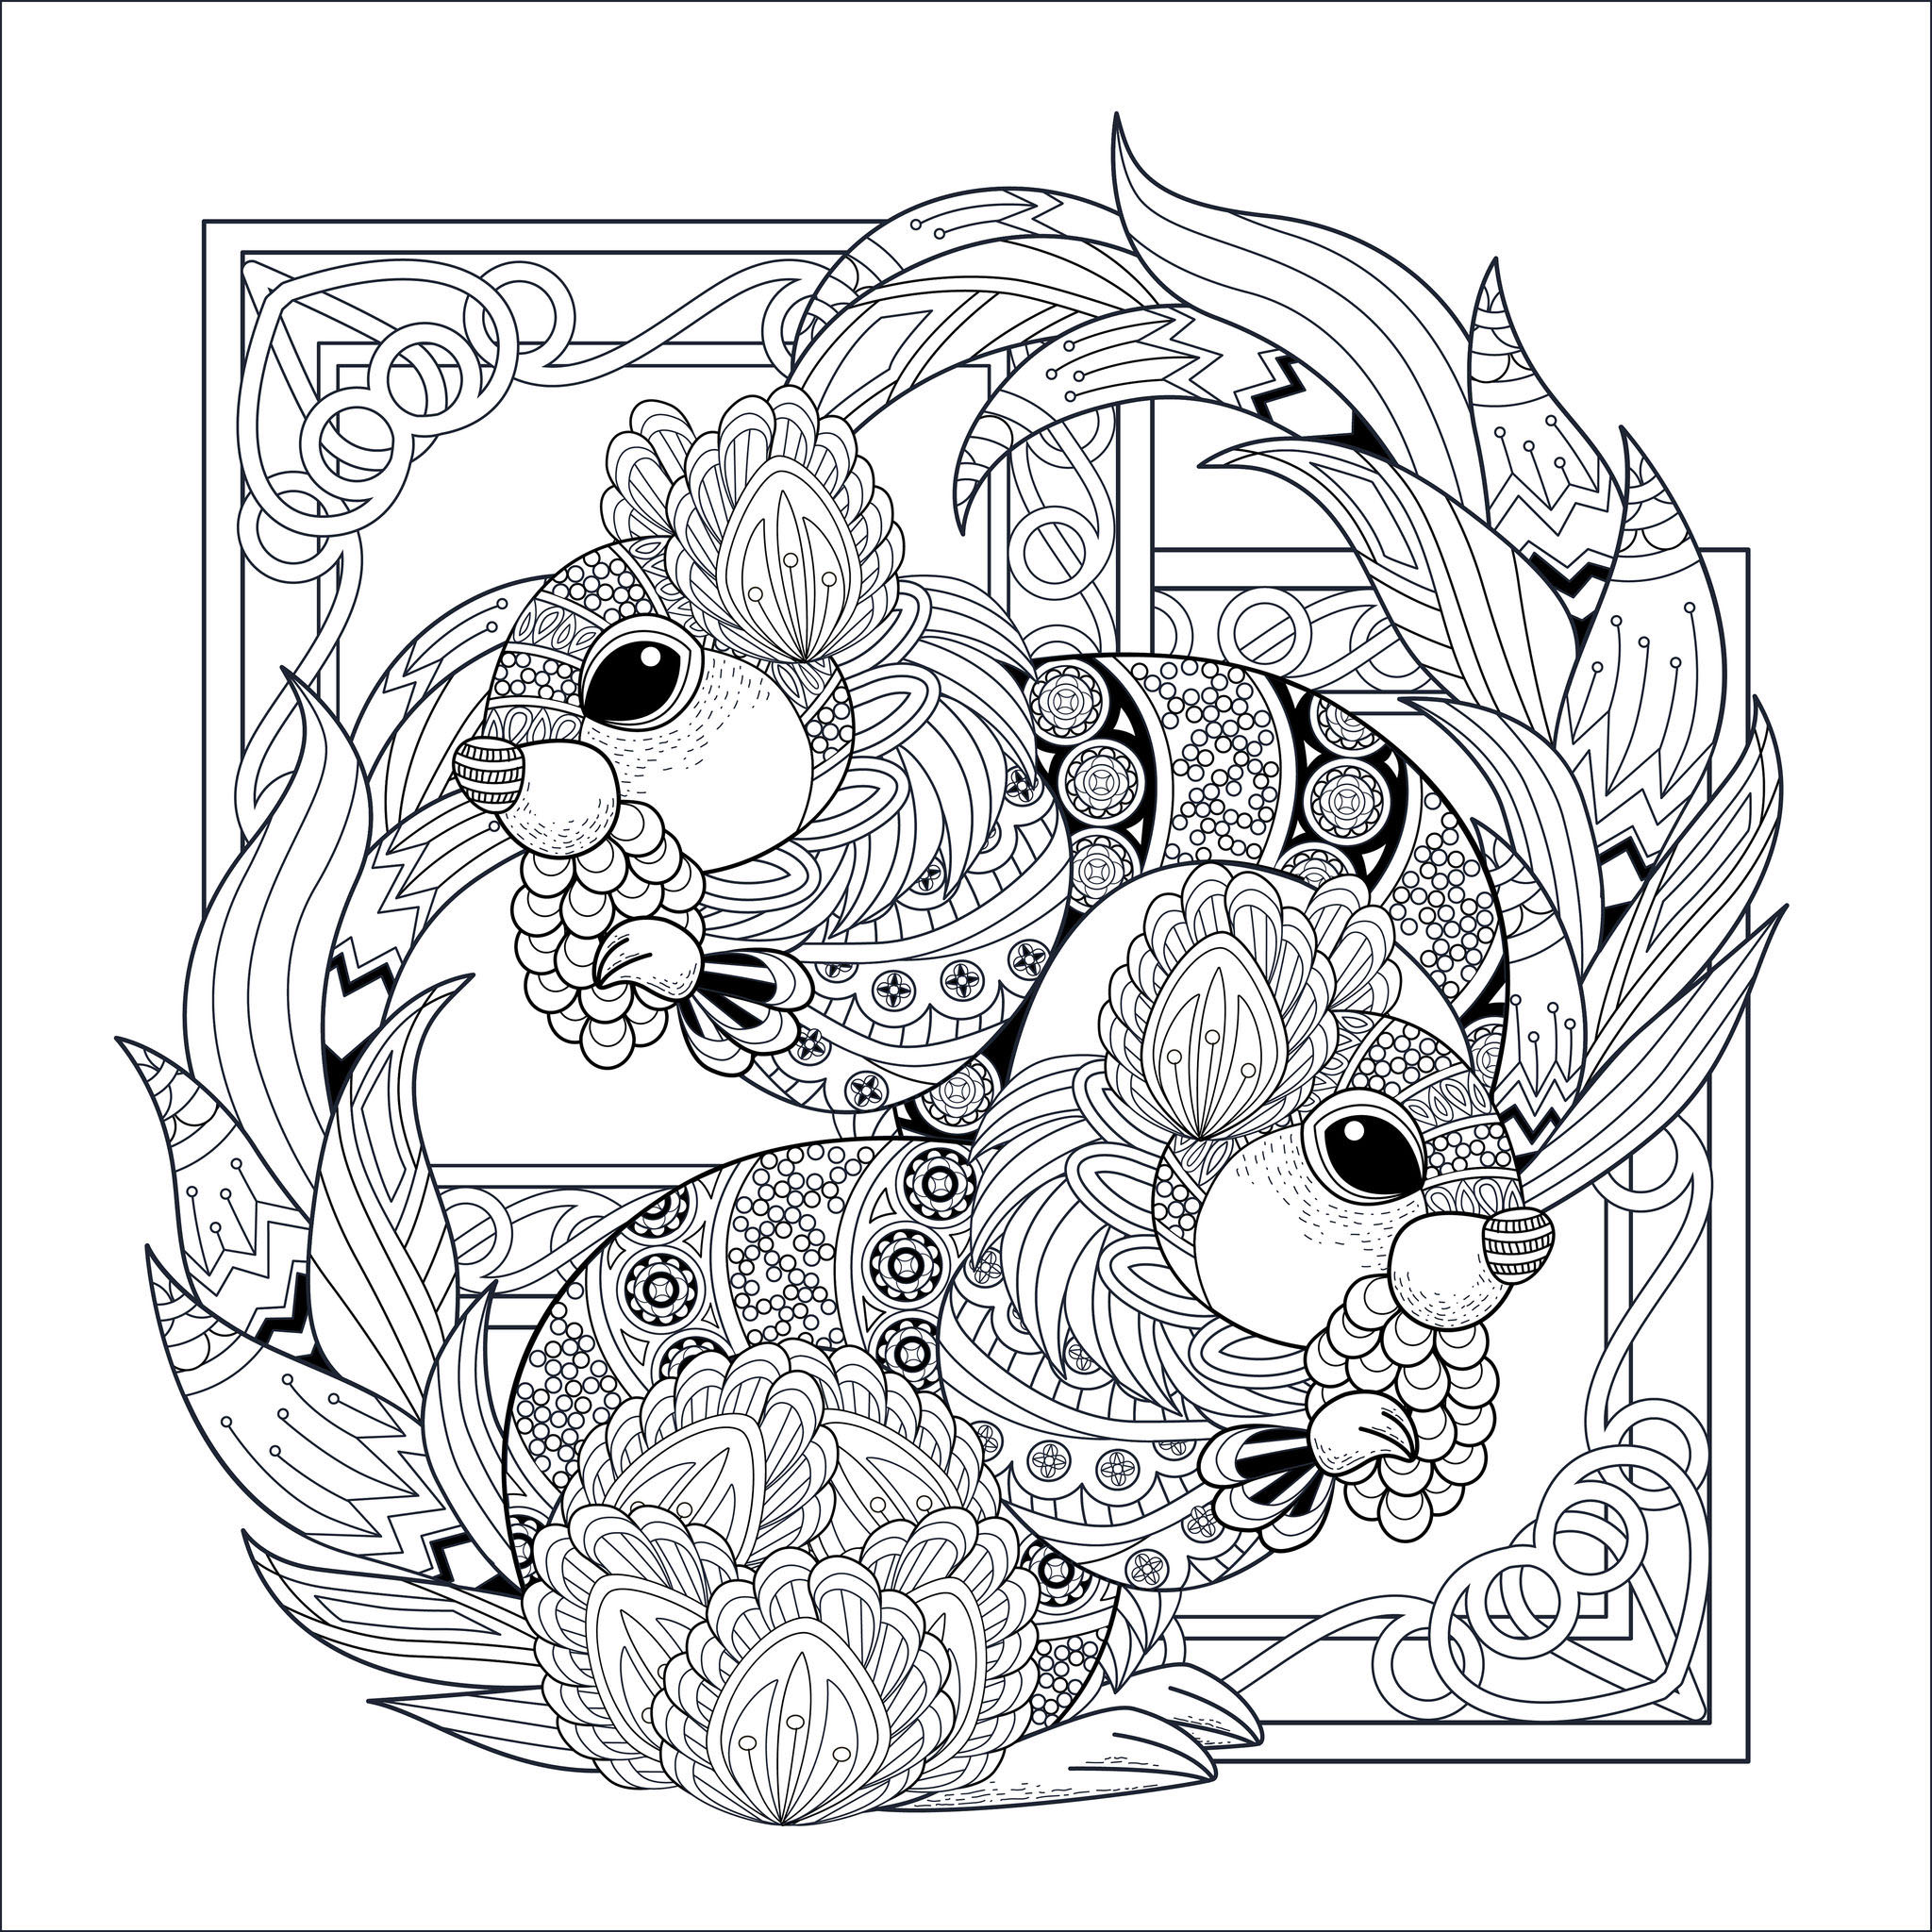 Two lovely squirrels - Squirrels & Rodents Adult Coloring Pages